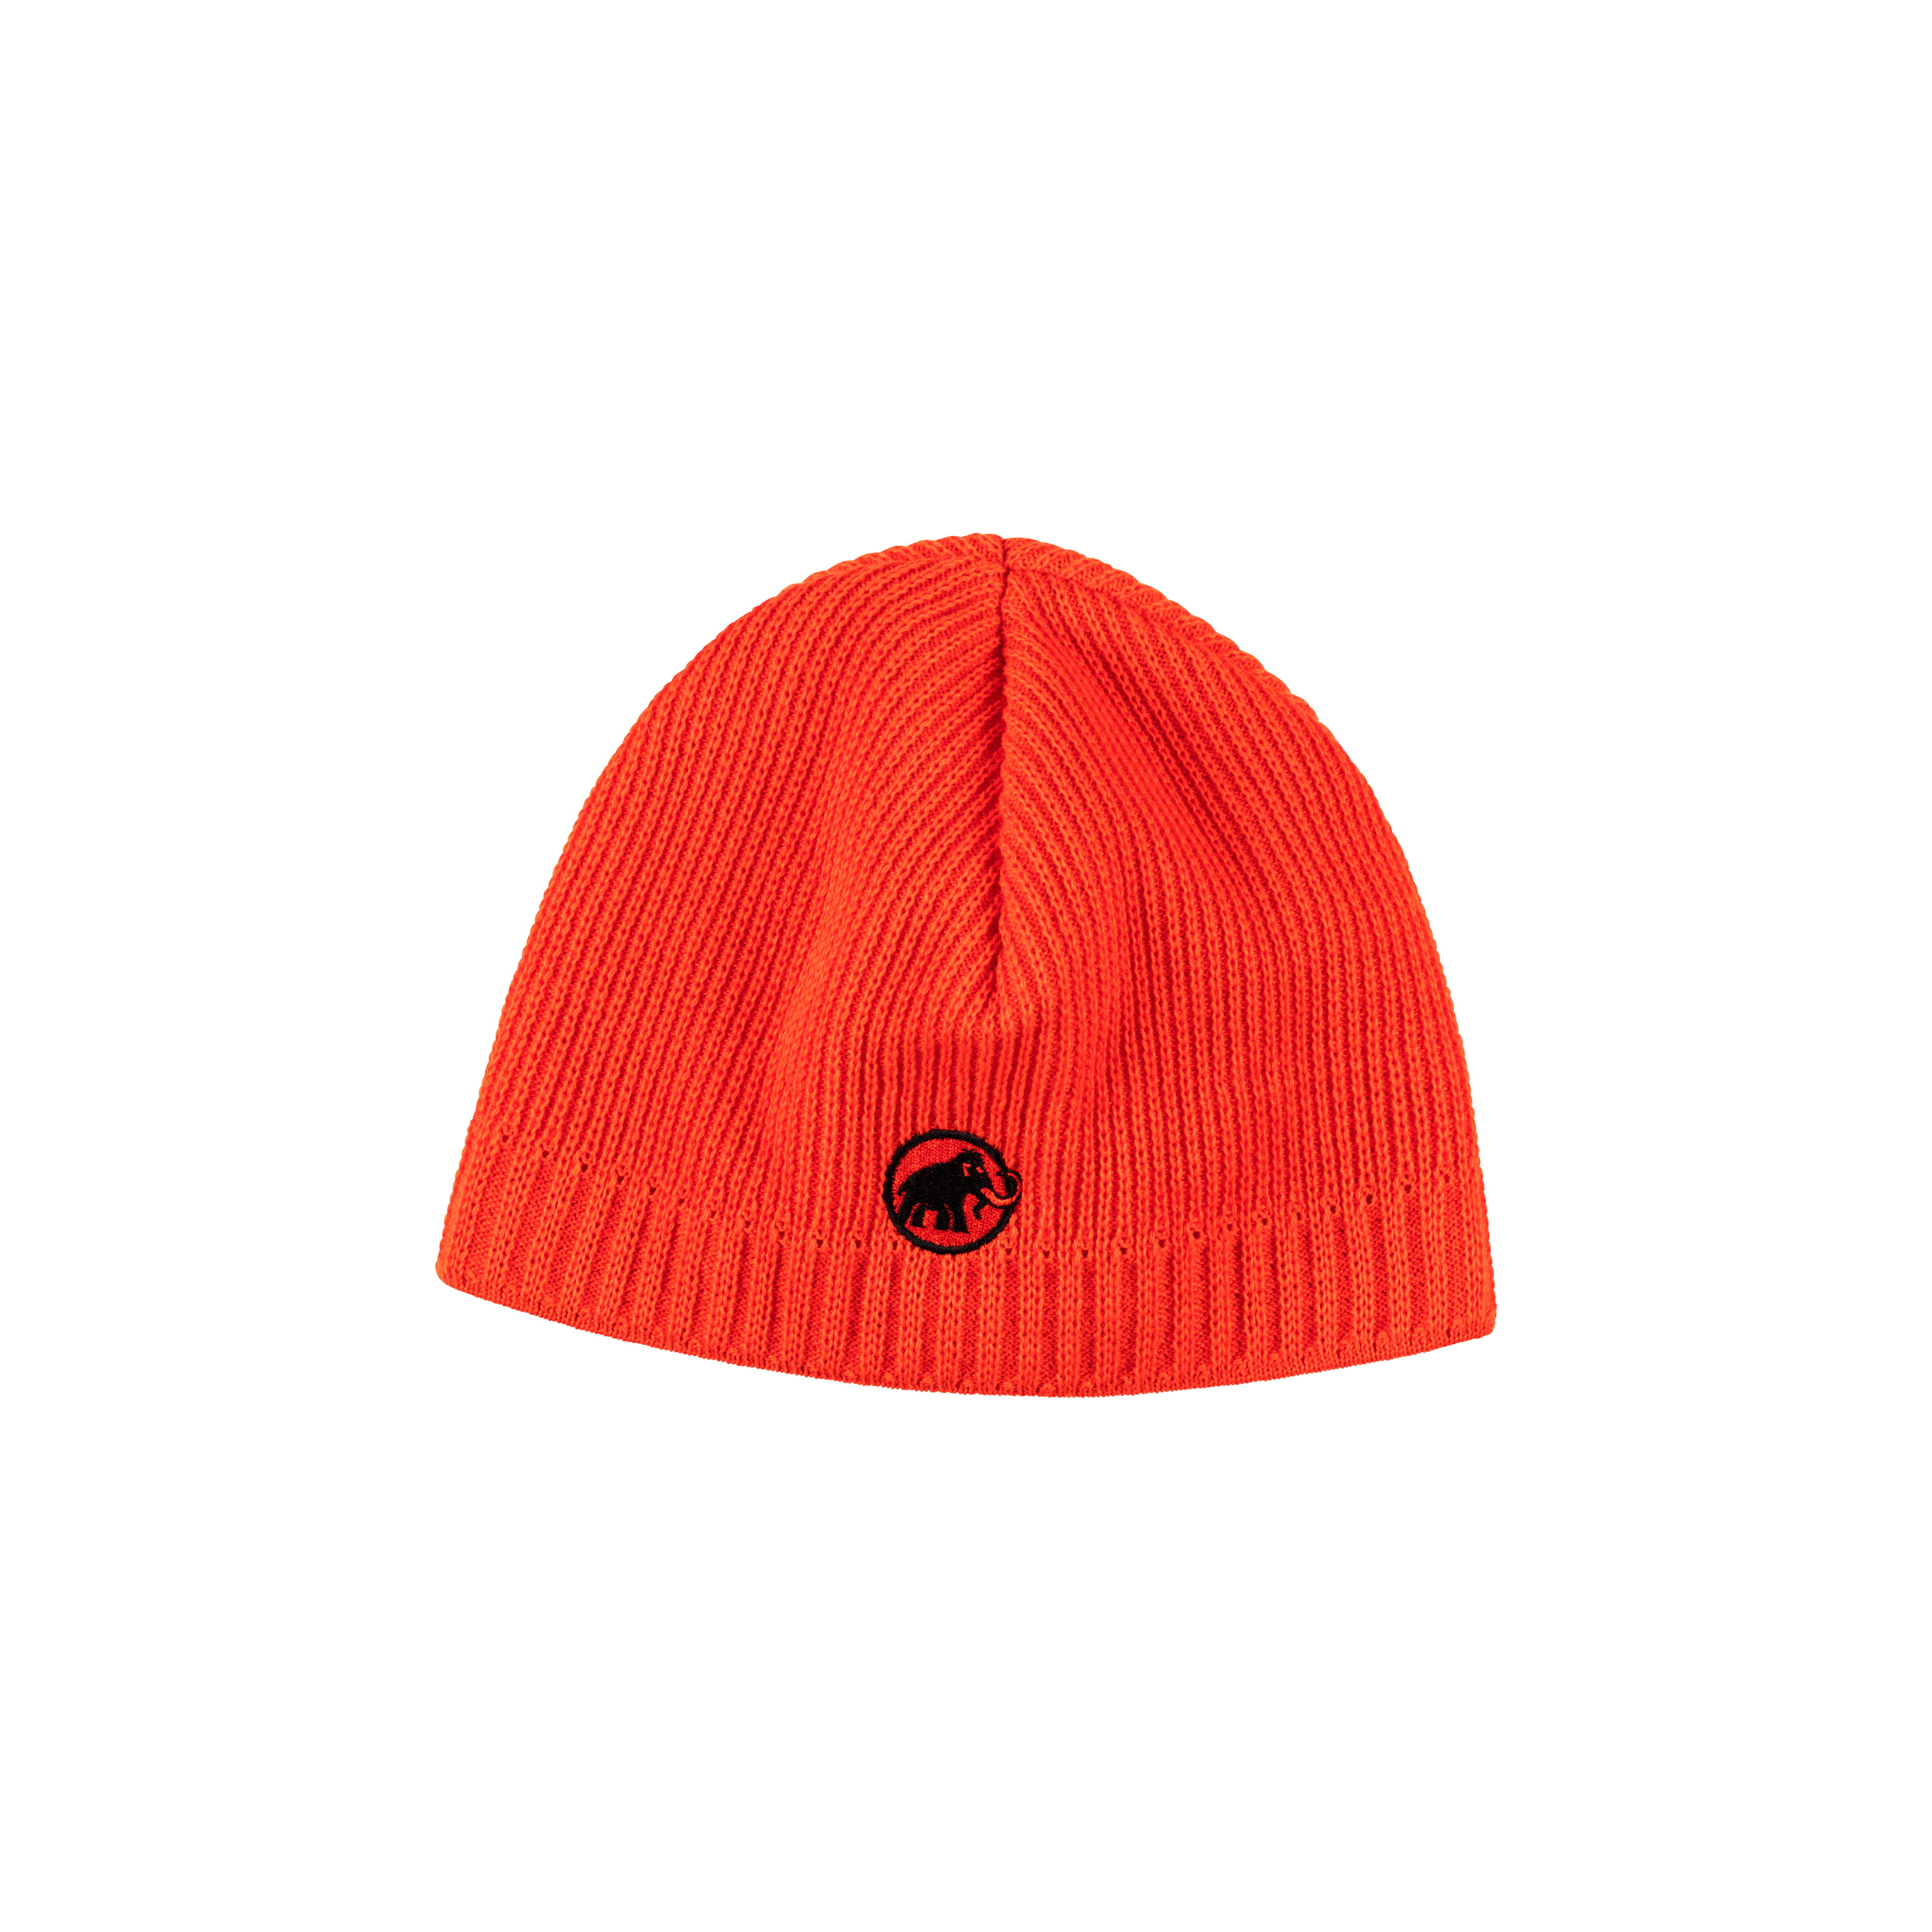 Sublime Beanie - hot red, one size thumbnail